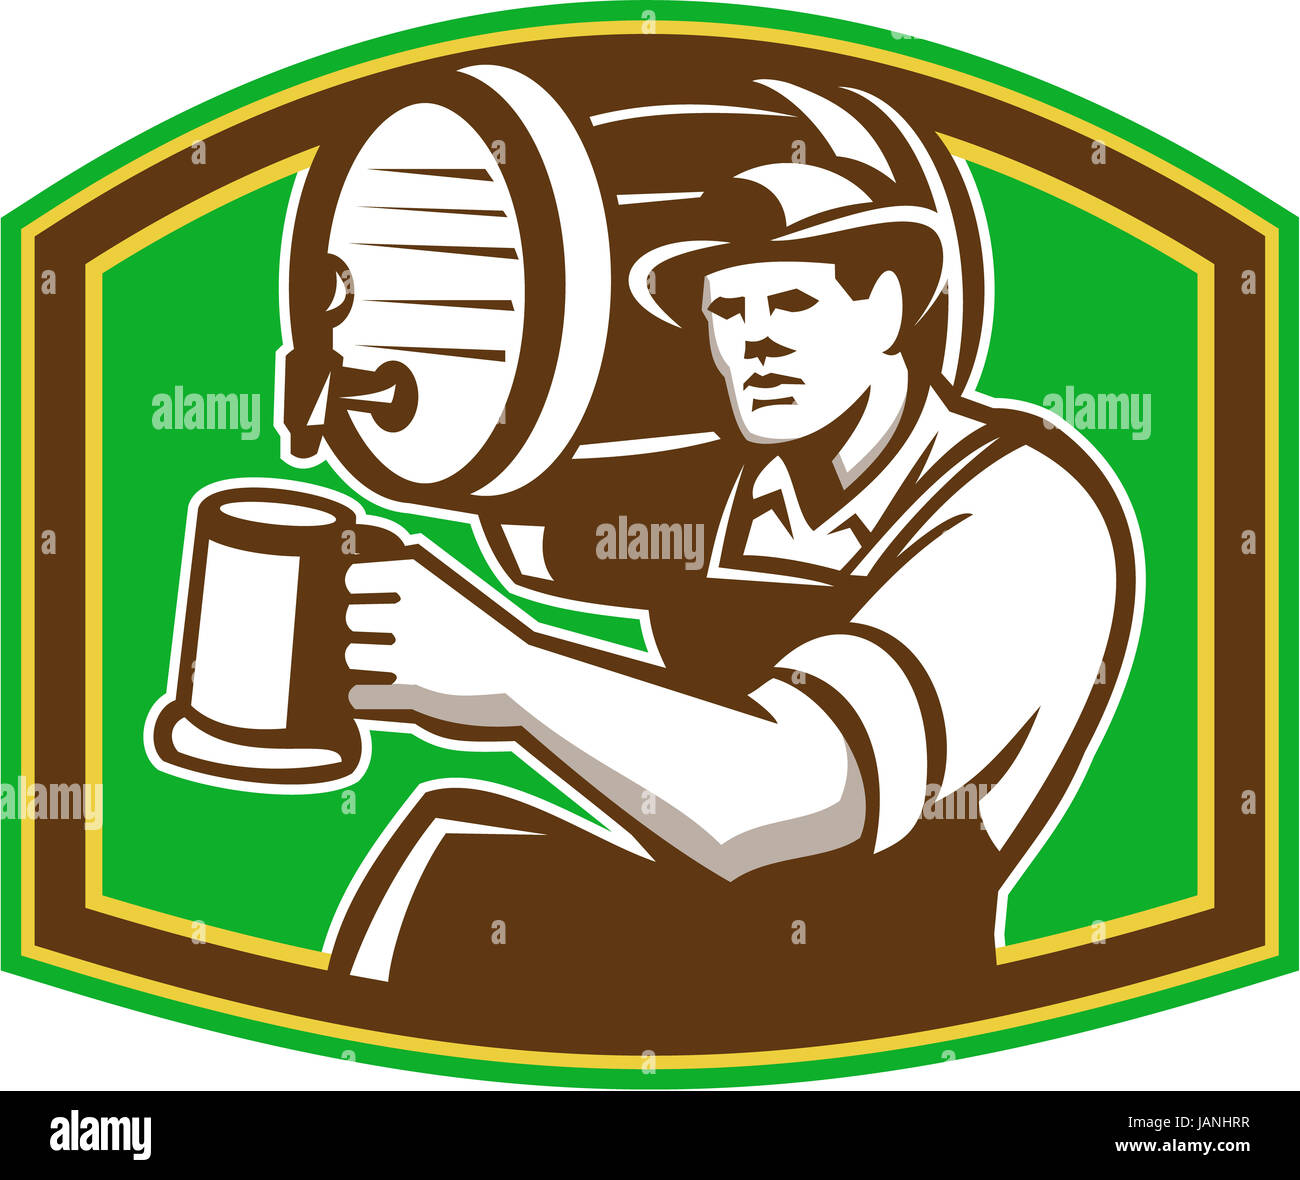 Retro style illustration of a barman barkeeper bartender pouring keg barrel of beer into mug facing front on isolated white background. Stock Photo